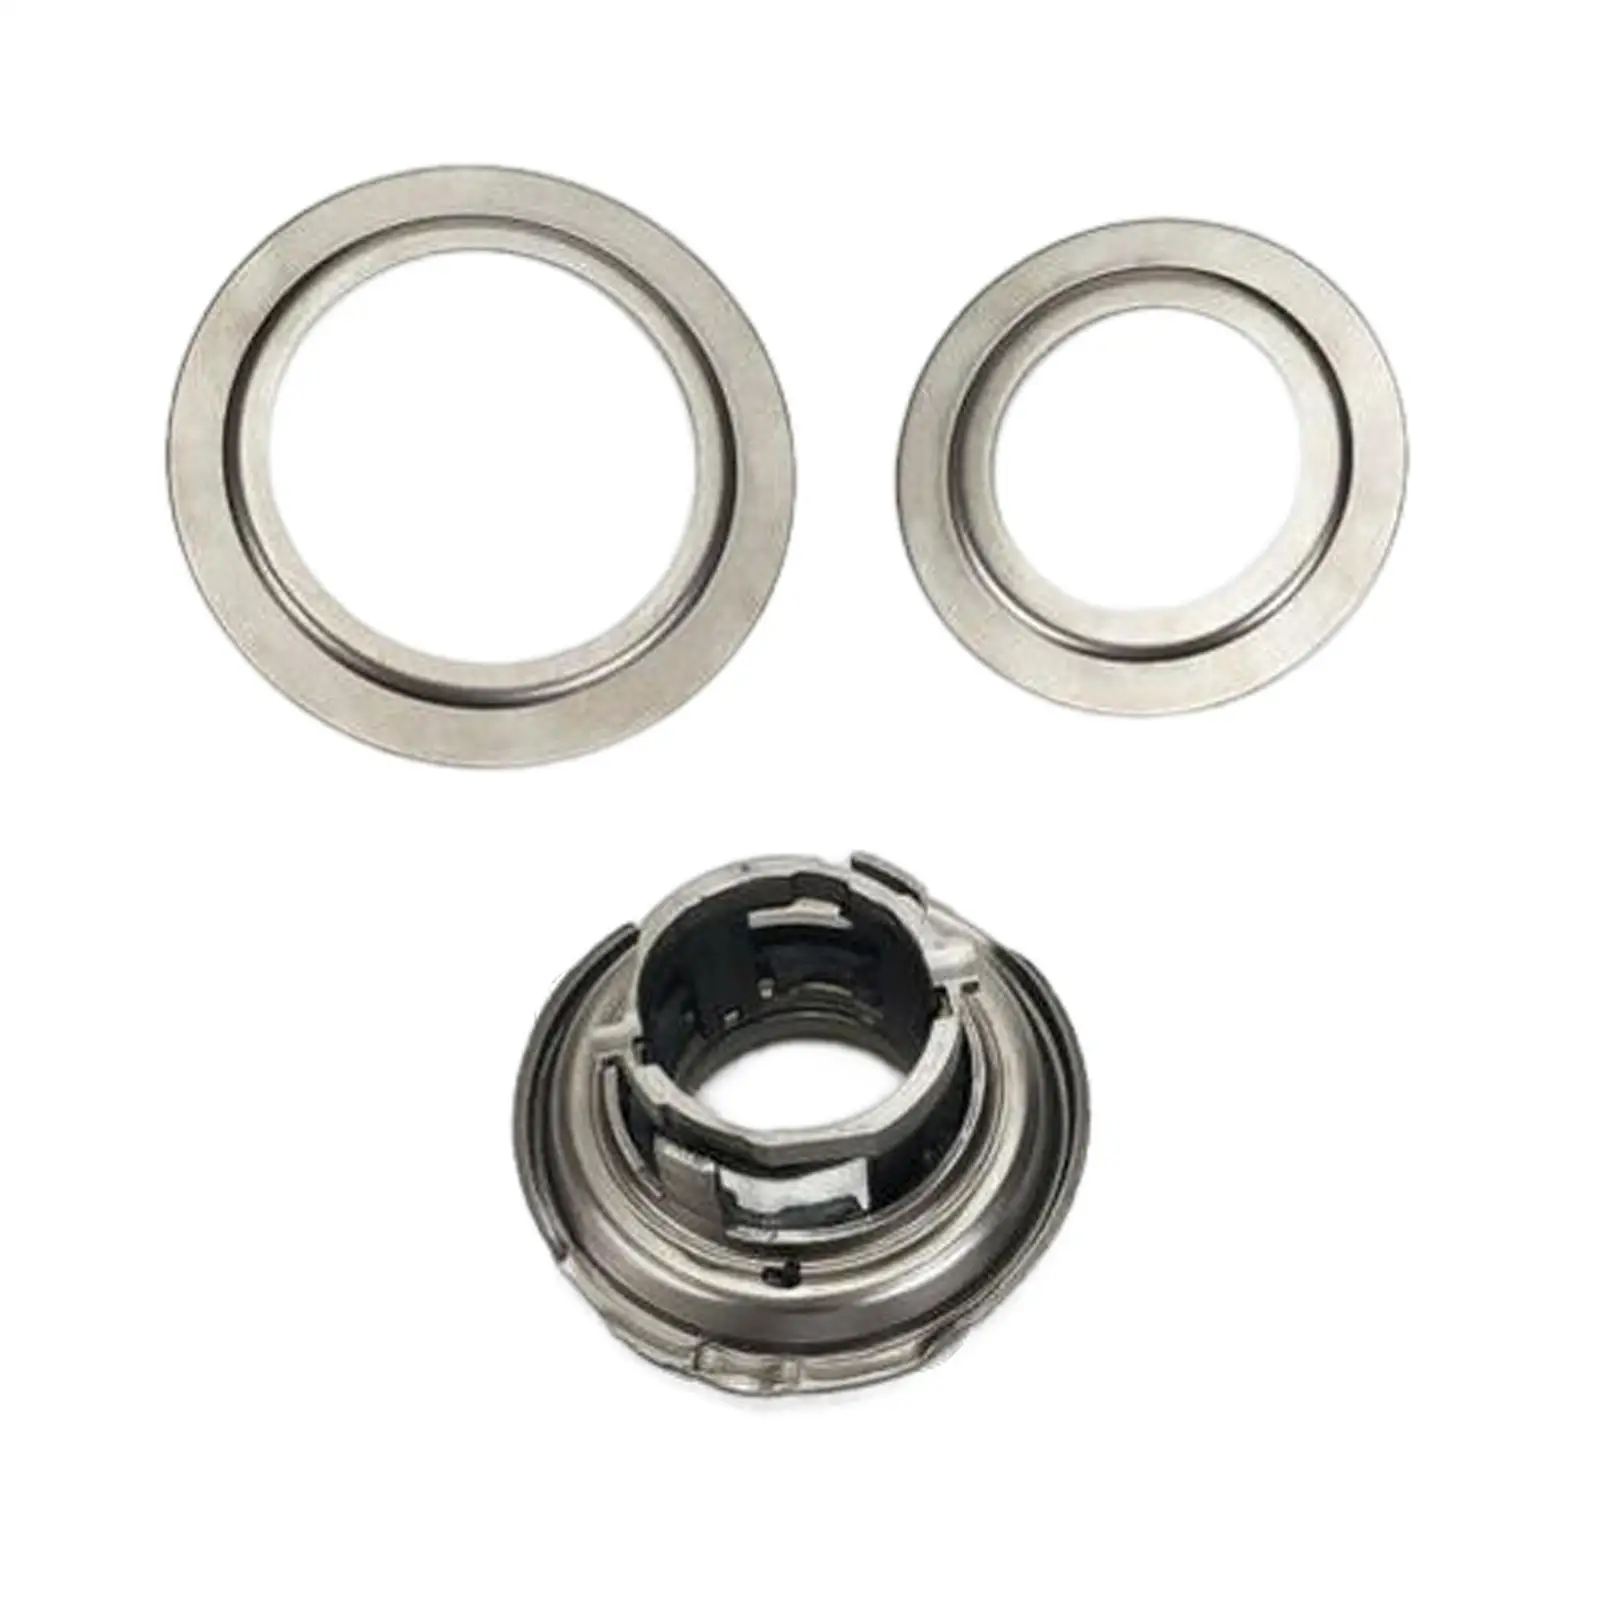 

Transmission Bearing Kit 6Dct250 Dps6 Metal Fits for